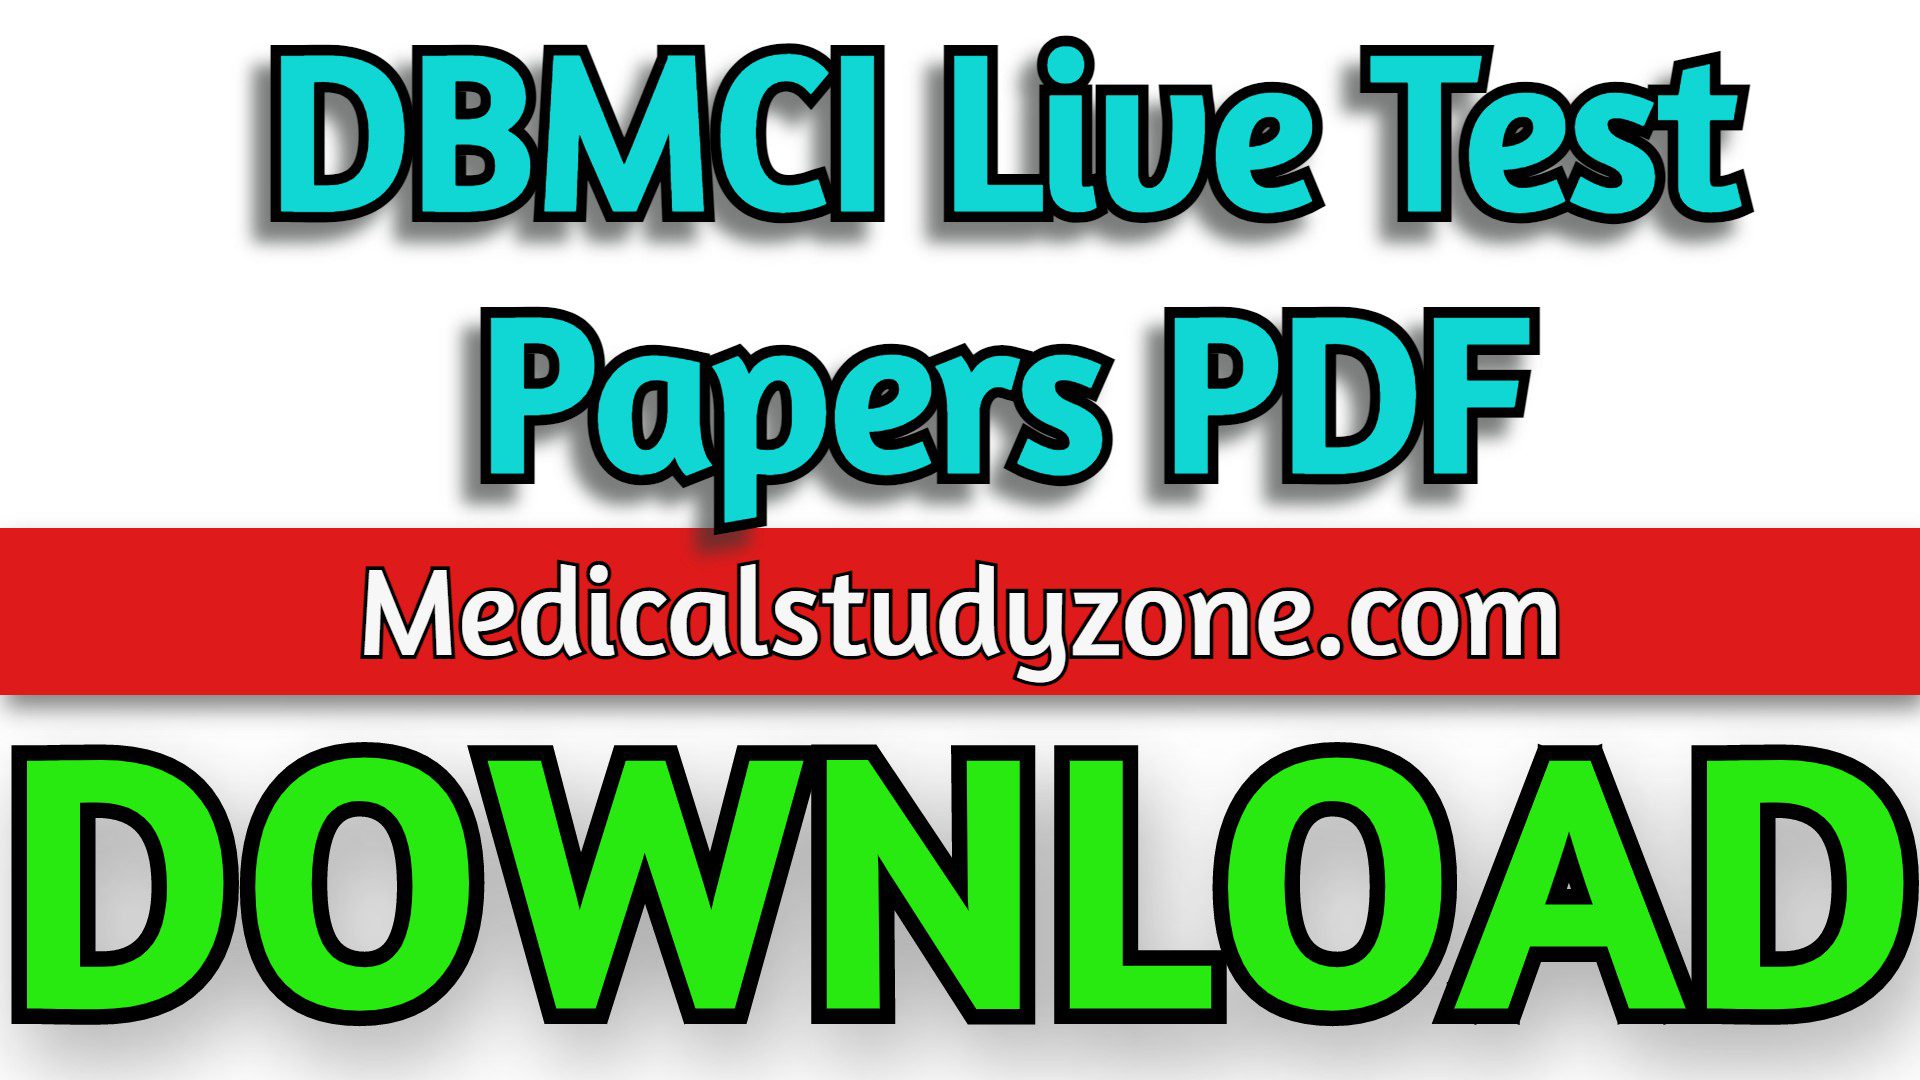 DBMCI Live Test Papers PDF 2021 Free Download